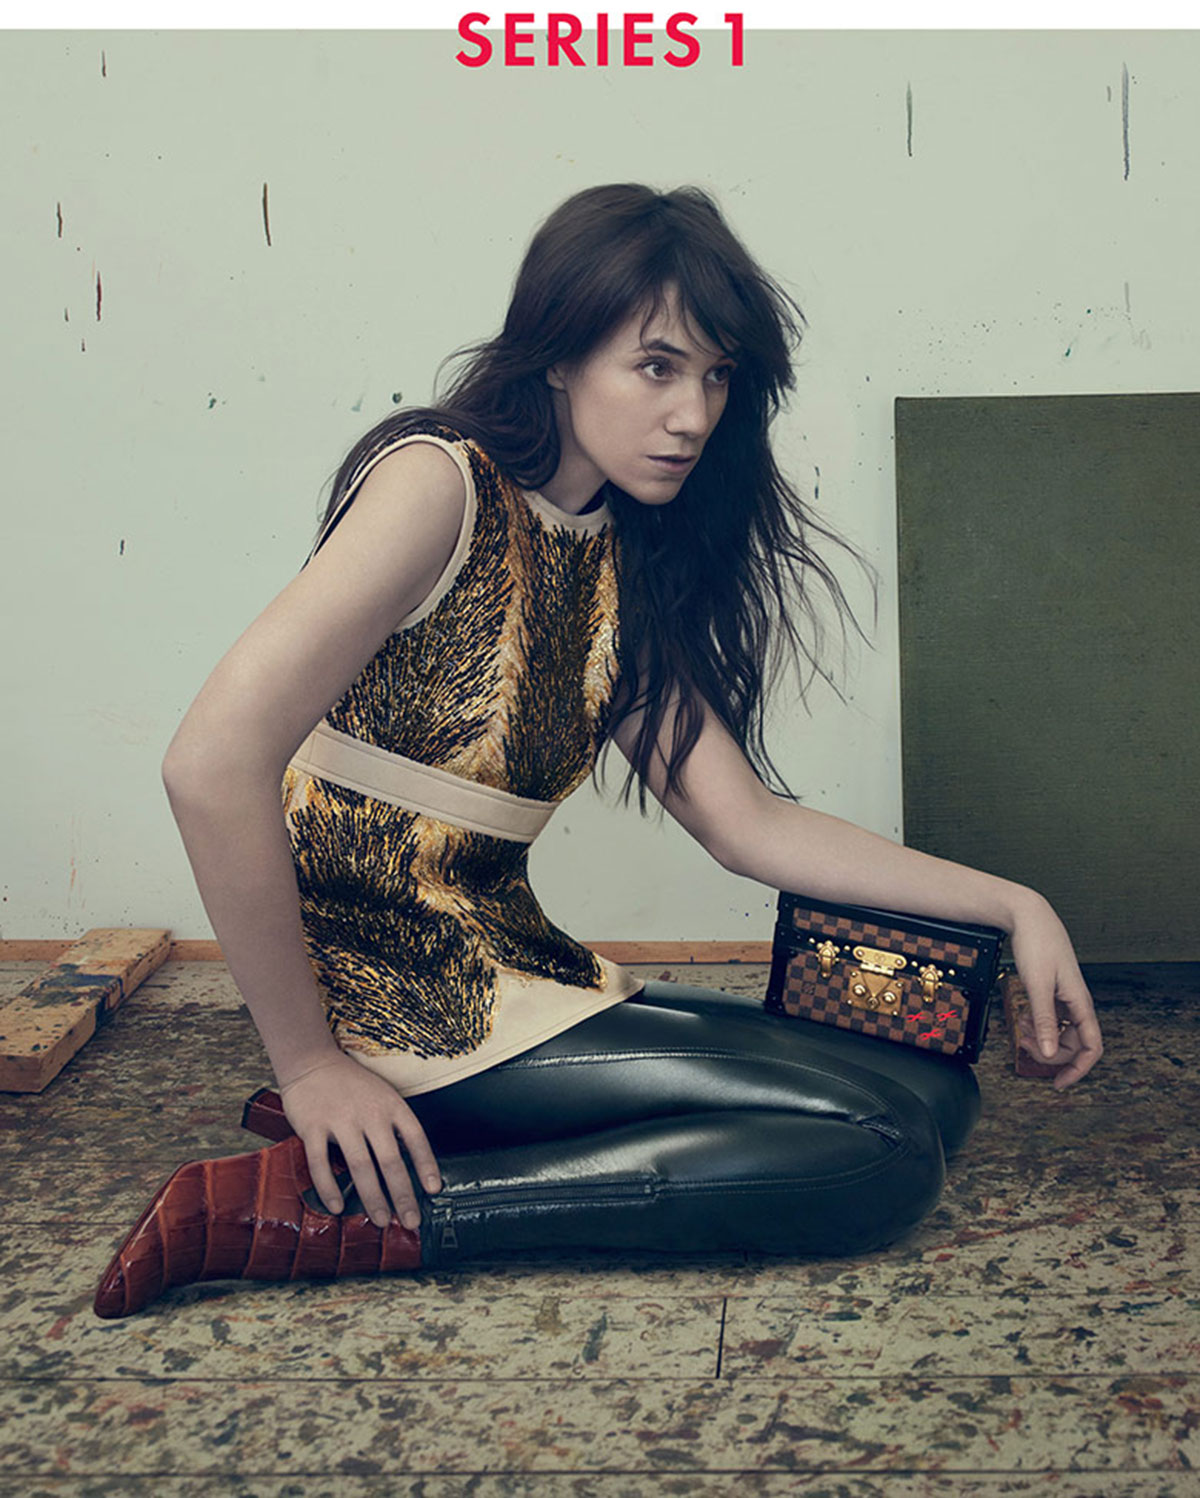 Charlotte Gainsbourg photoshoot for Gucci